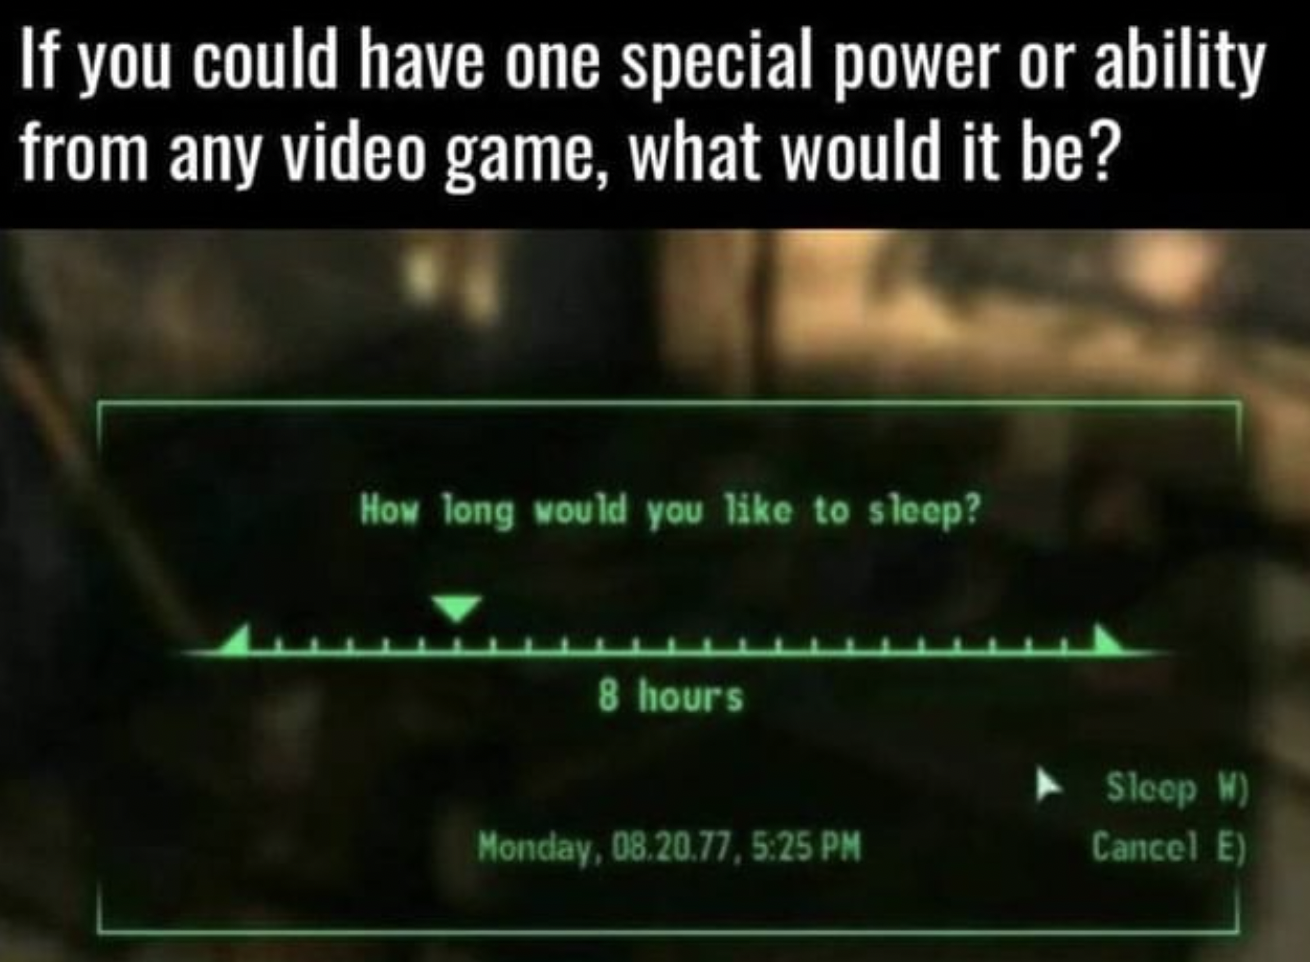 Gaming Memes - video game memes - If you could have one special power or ability from any video game, what would it be? How long would you to sleep? 8 hours